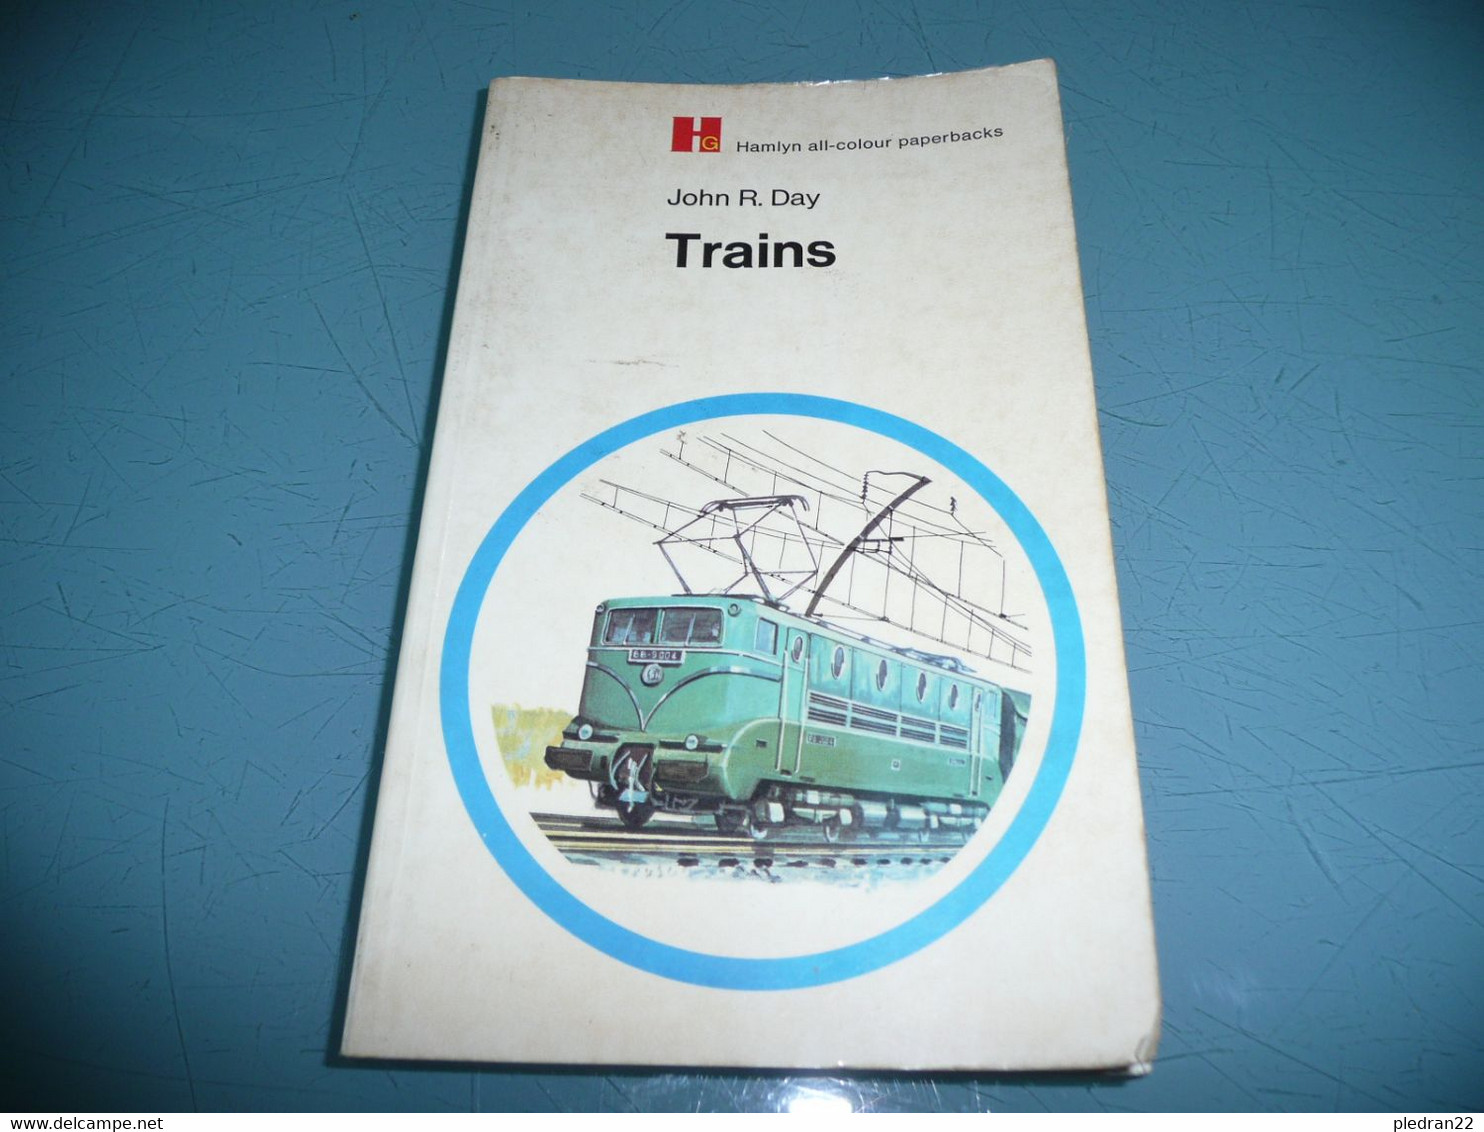 JOHN R. DAY TRAINS CHEMINS DE FER ILLUSTRATIONS COULEURS 1969 - Books On Collecting